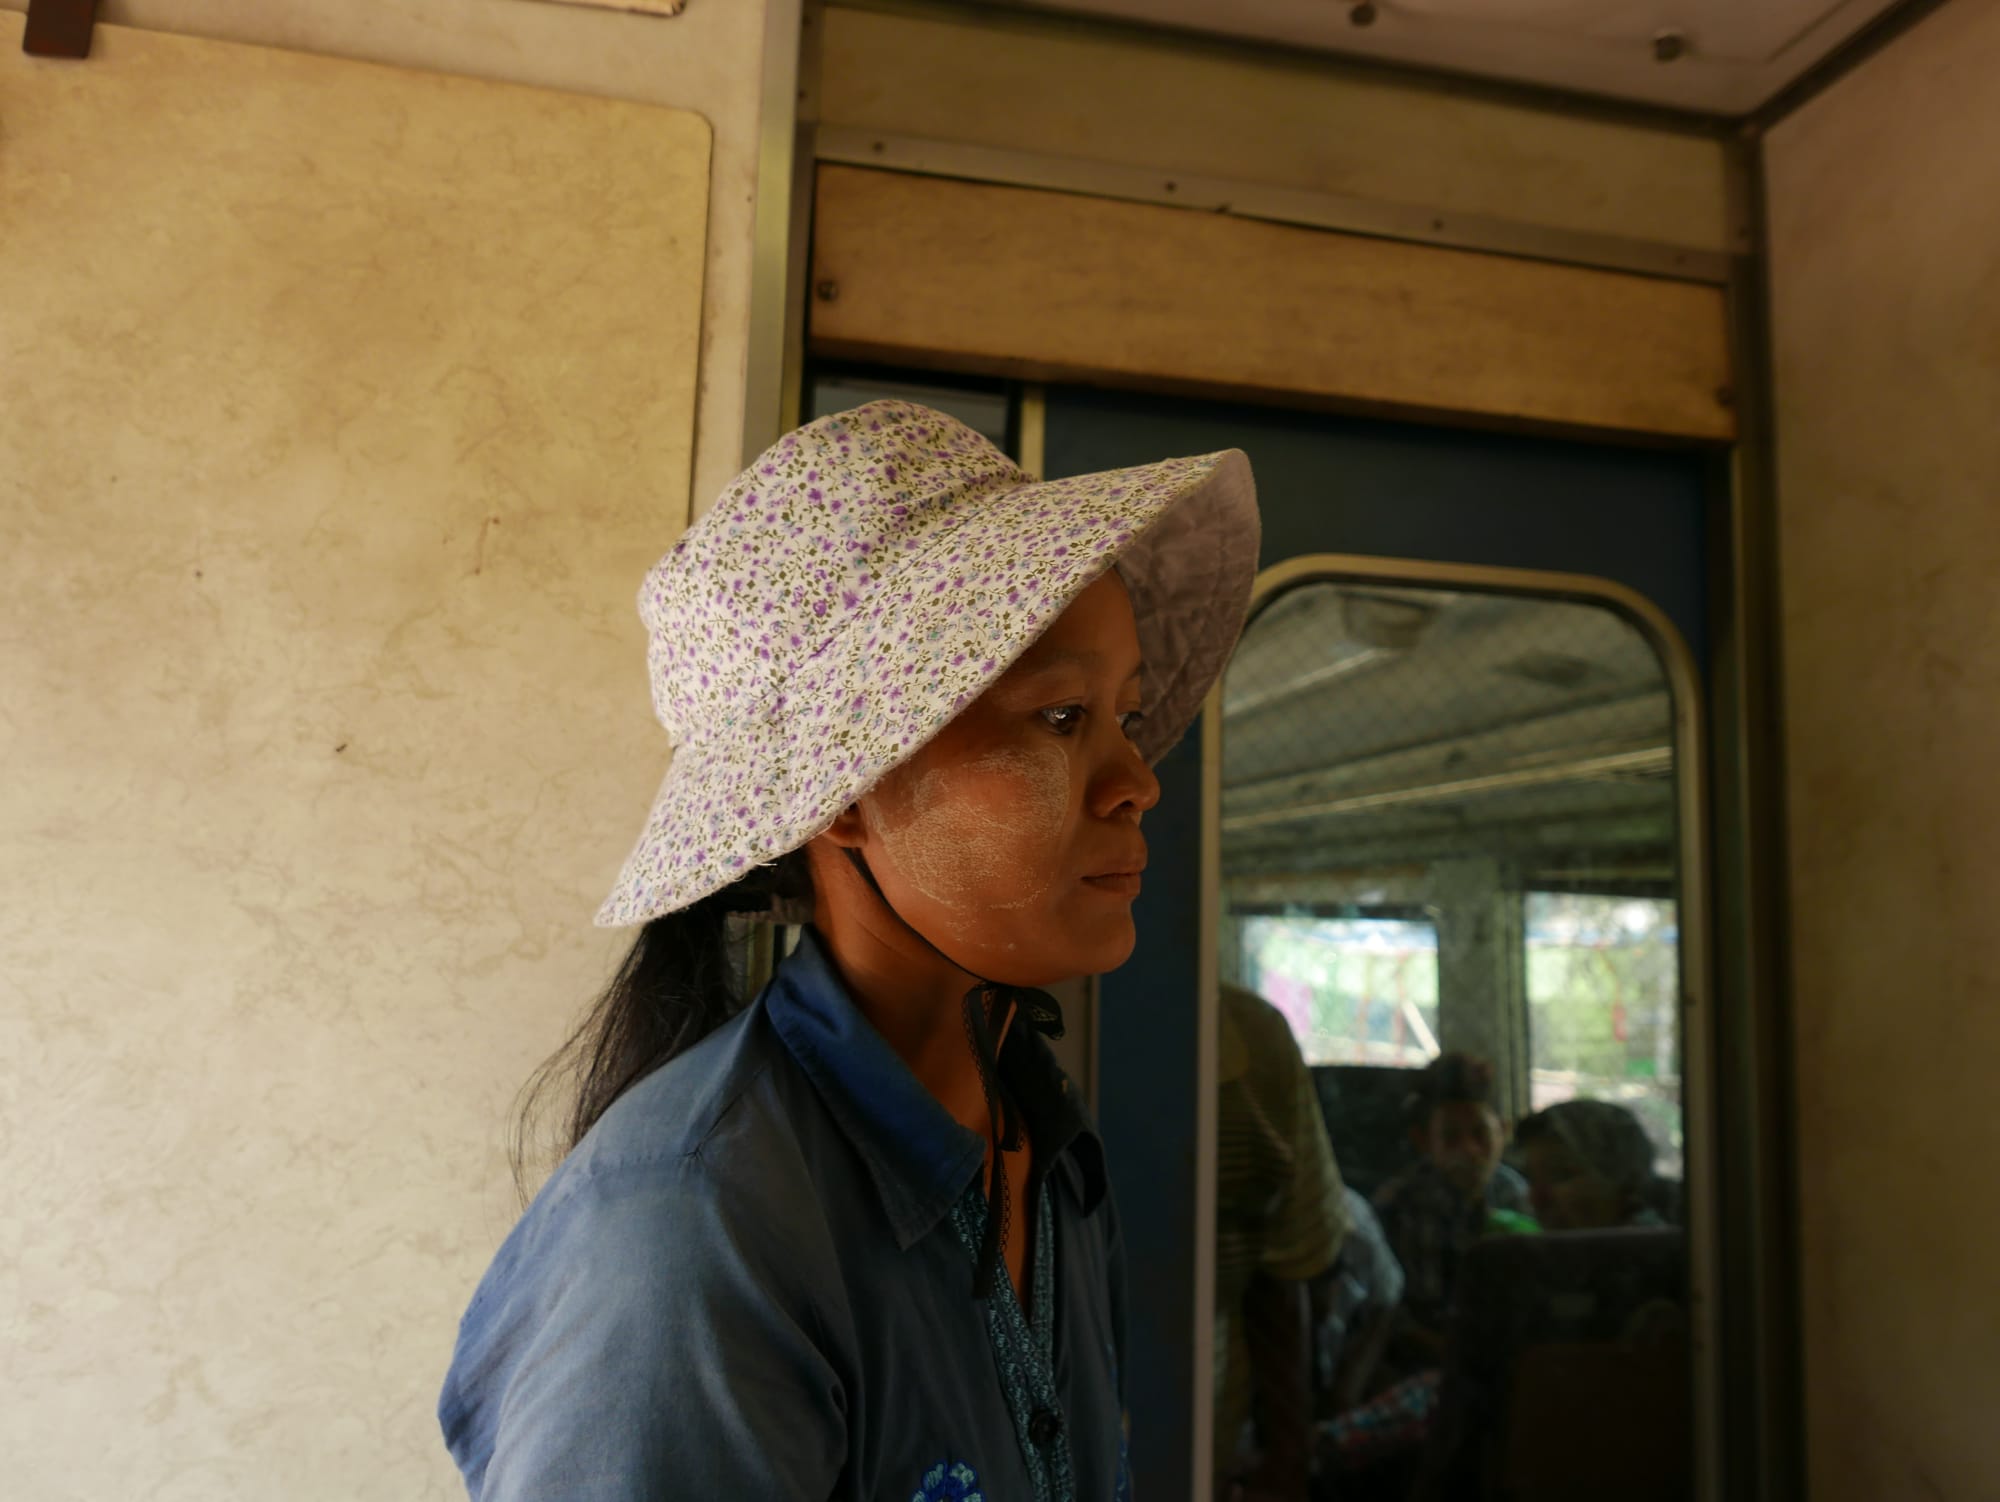 Photo by Author — a passenger on the Yangon Railway